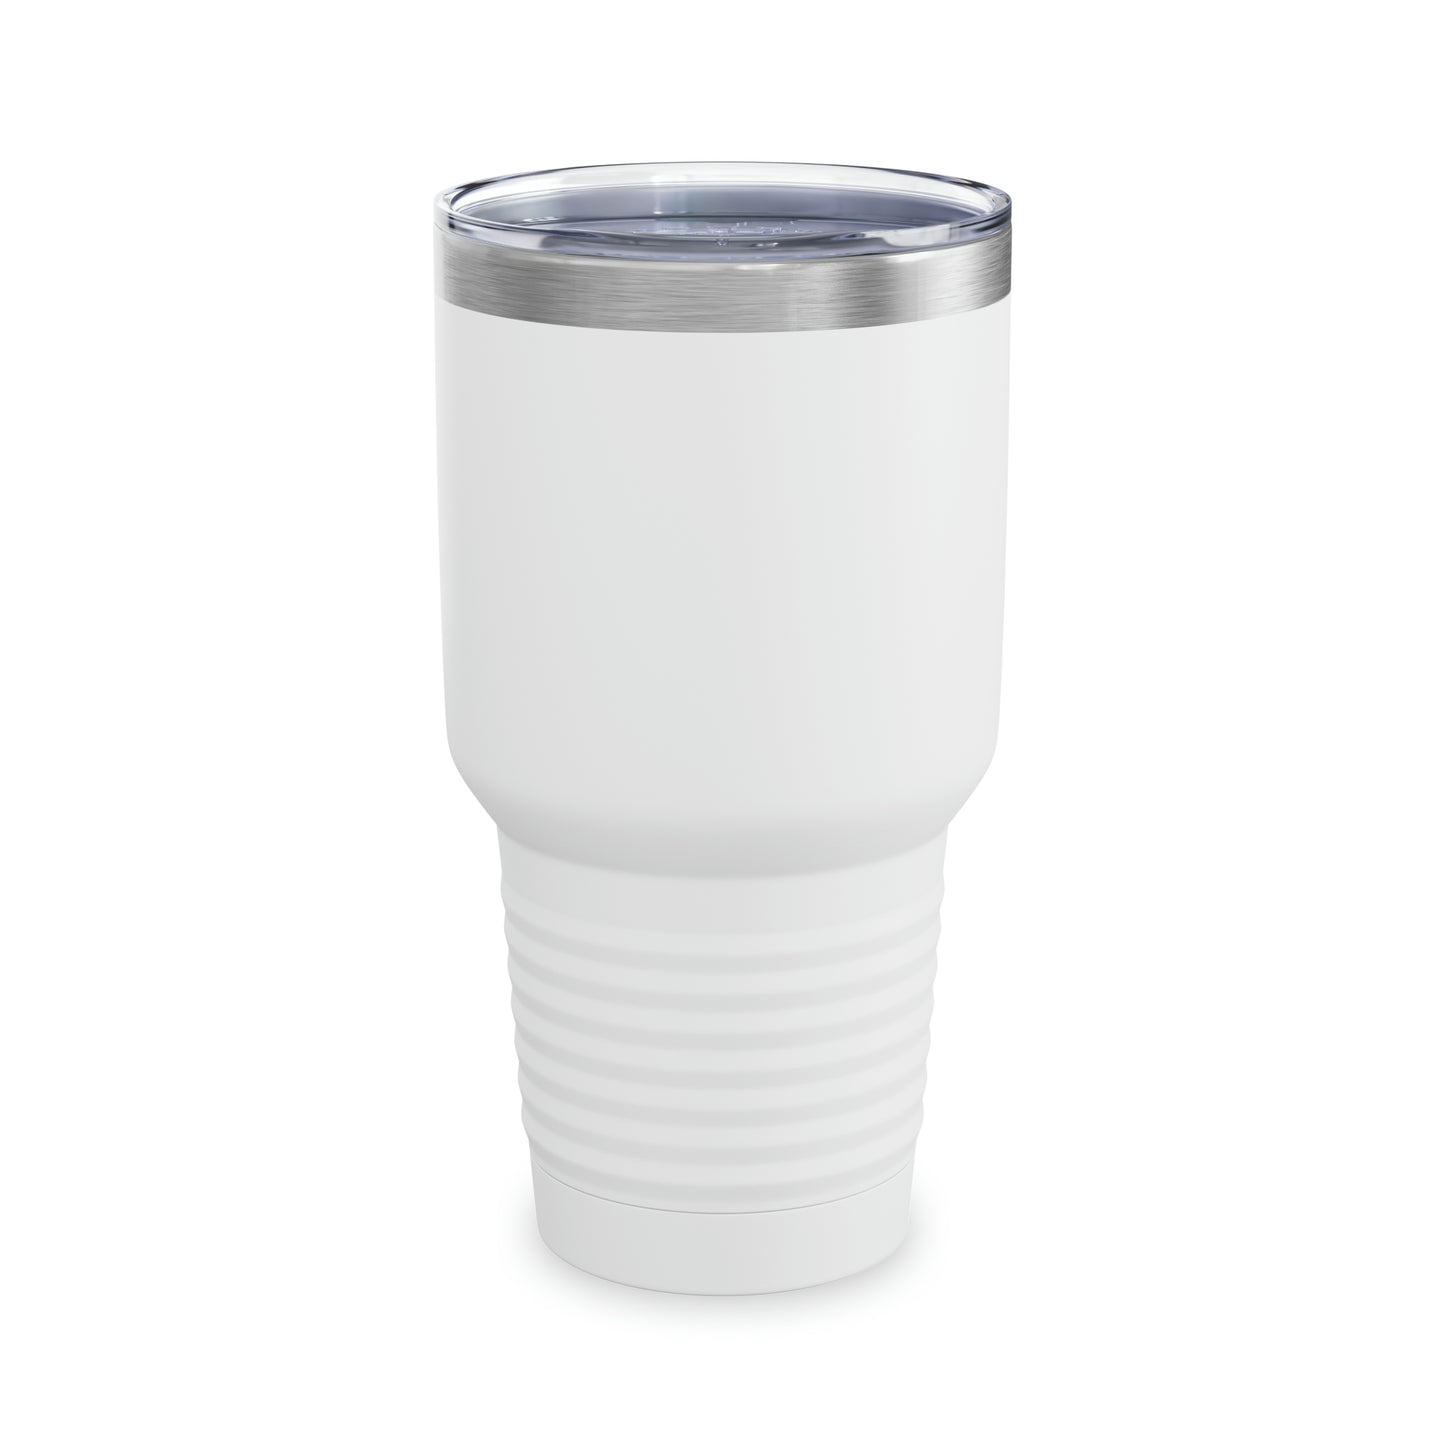 Lake Life: Disconnect your mind, reconnect your soul Ringneck Tumbler, 30oz